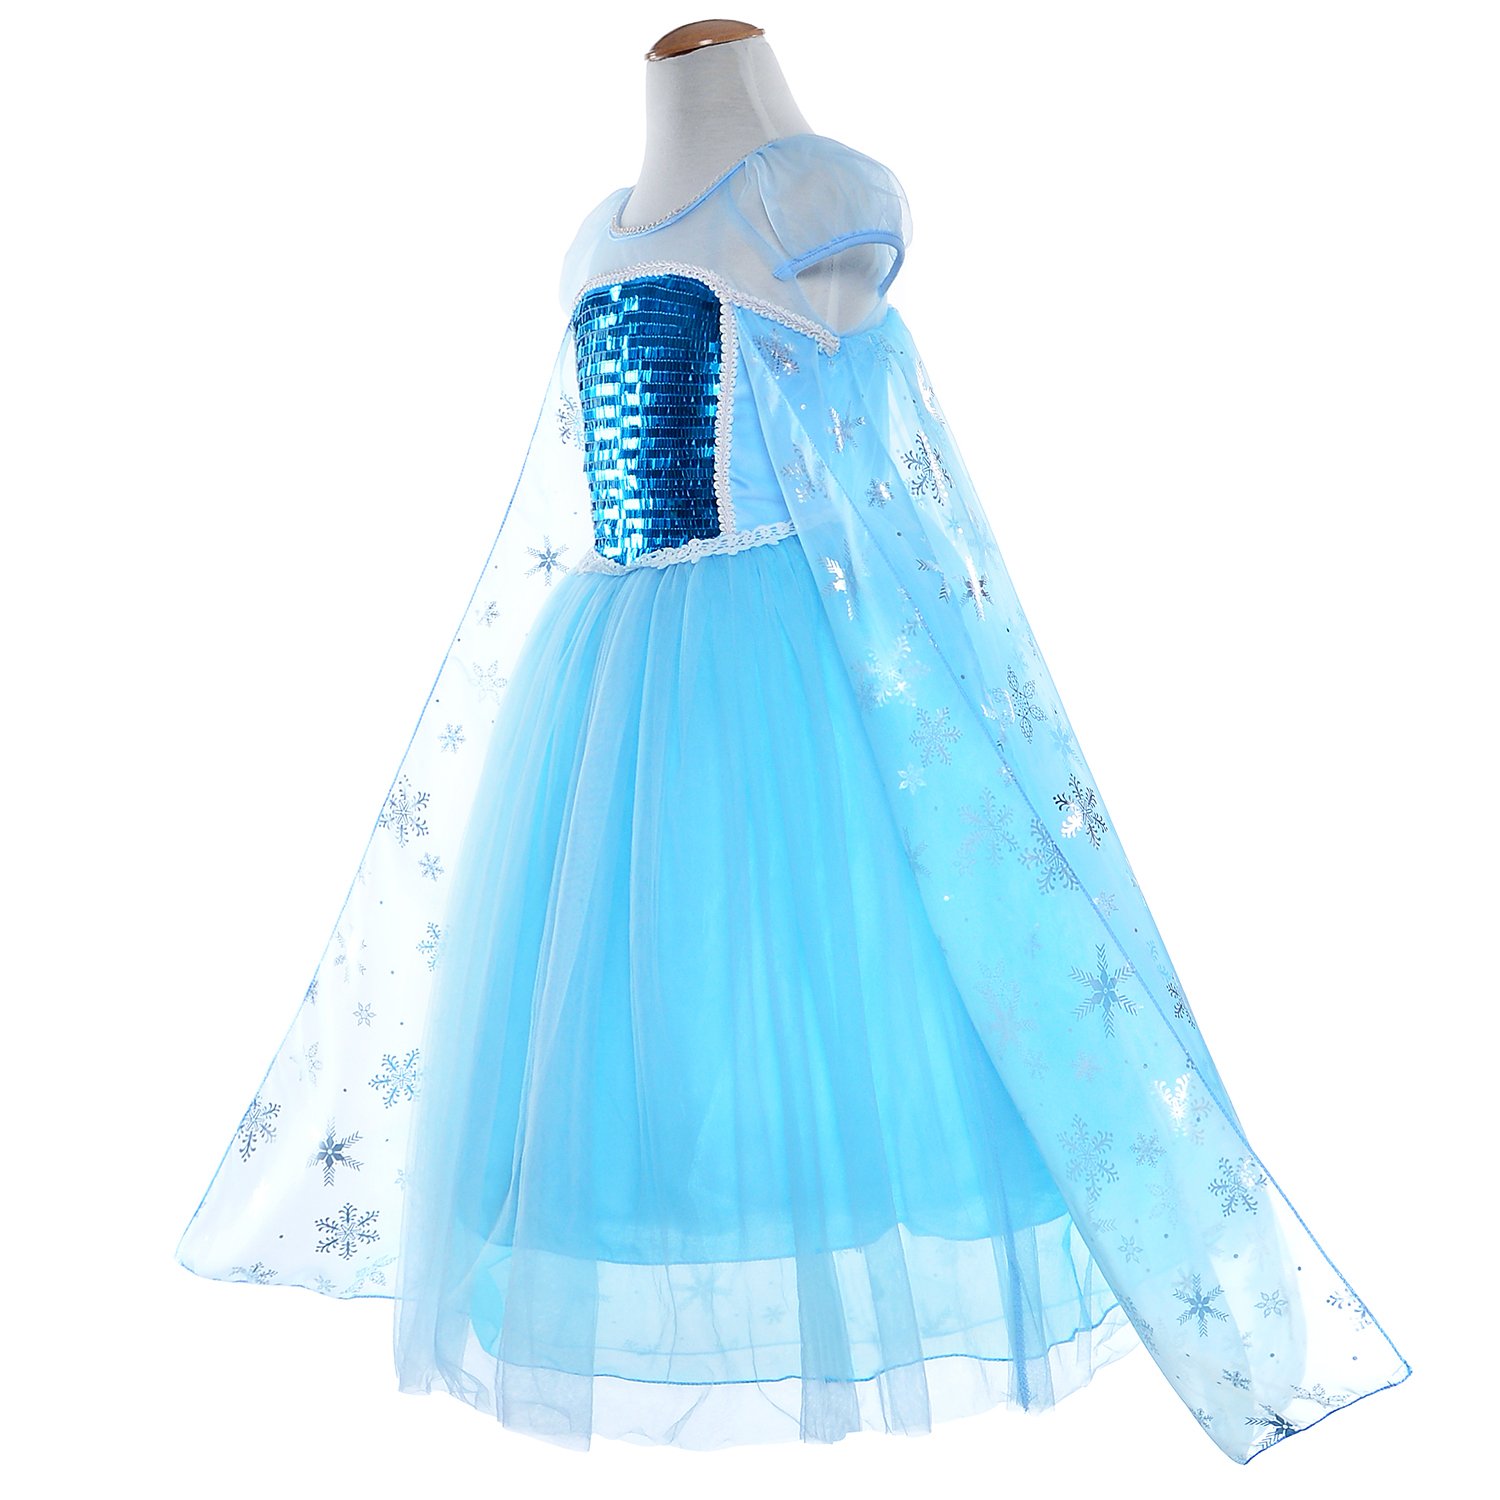 Party Chili Princess Costumes Birthday Dress Up For Little Girls with Crown,Mace,Gloves Accessories 3-12 Years